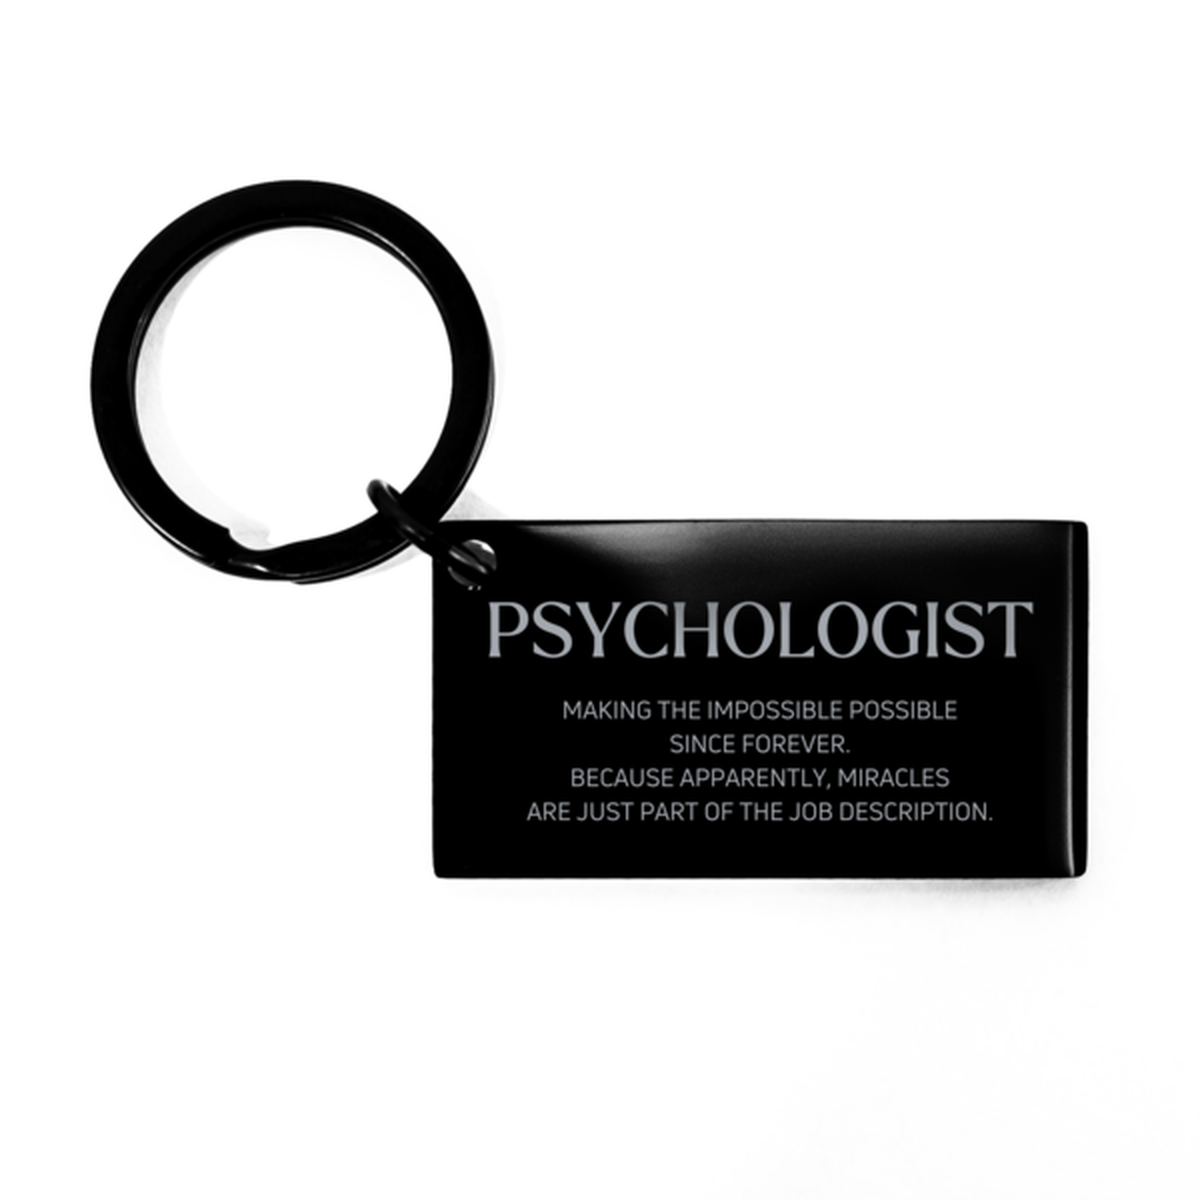 Funny Psychologist Gifts, Miracles are just part of the job description, Inspirational Birthday Keychain For Psychologist, Men, Women, Coworkers, Friends, Boss